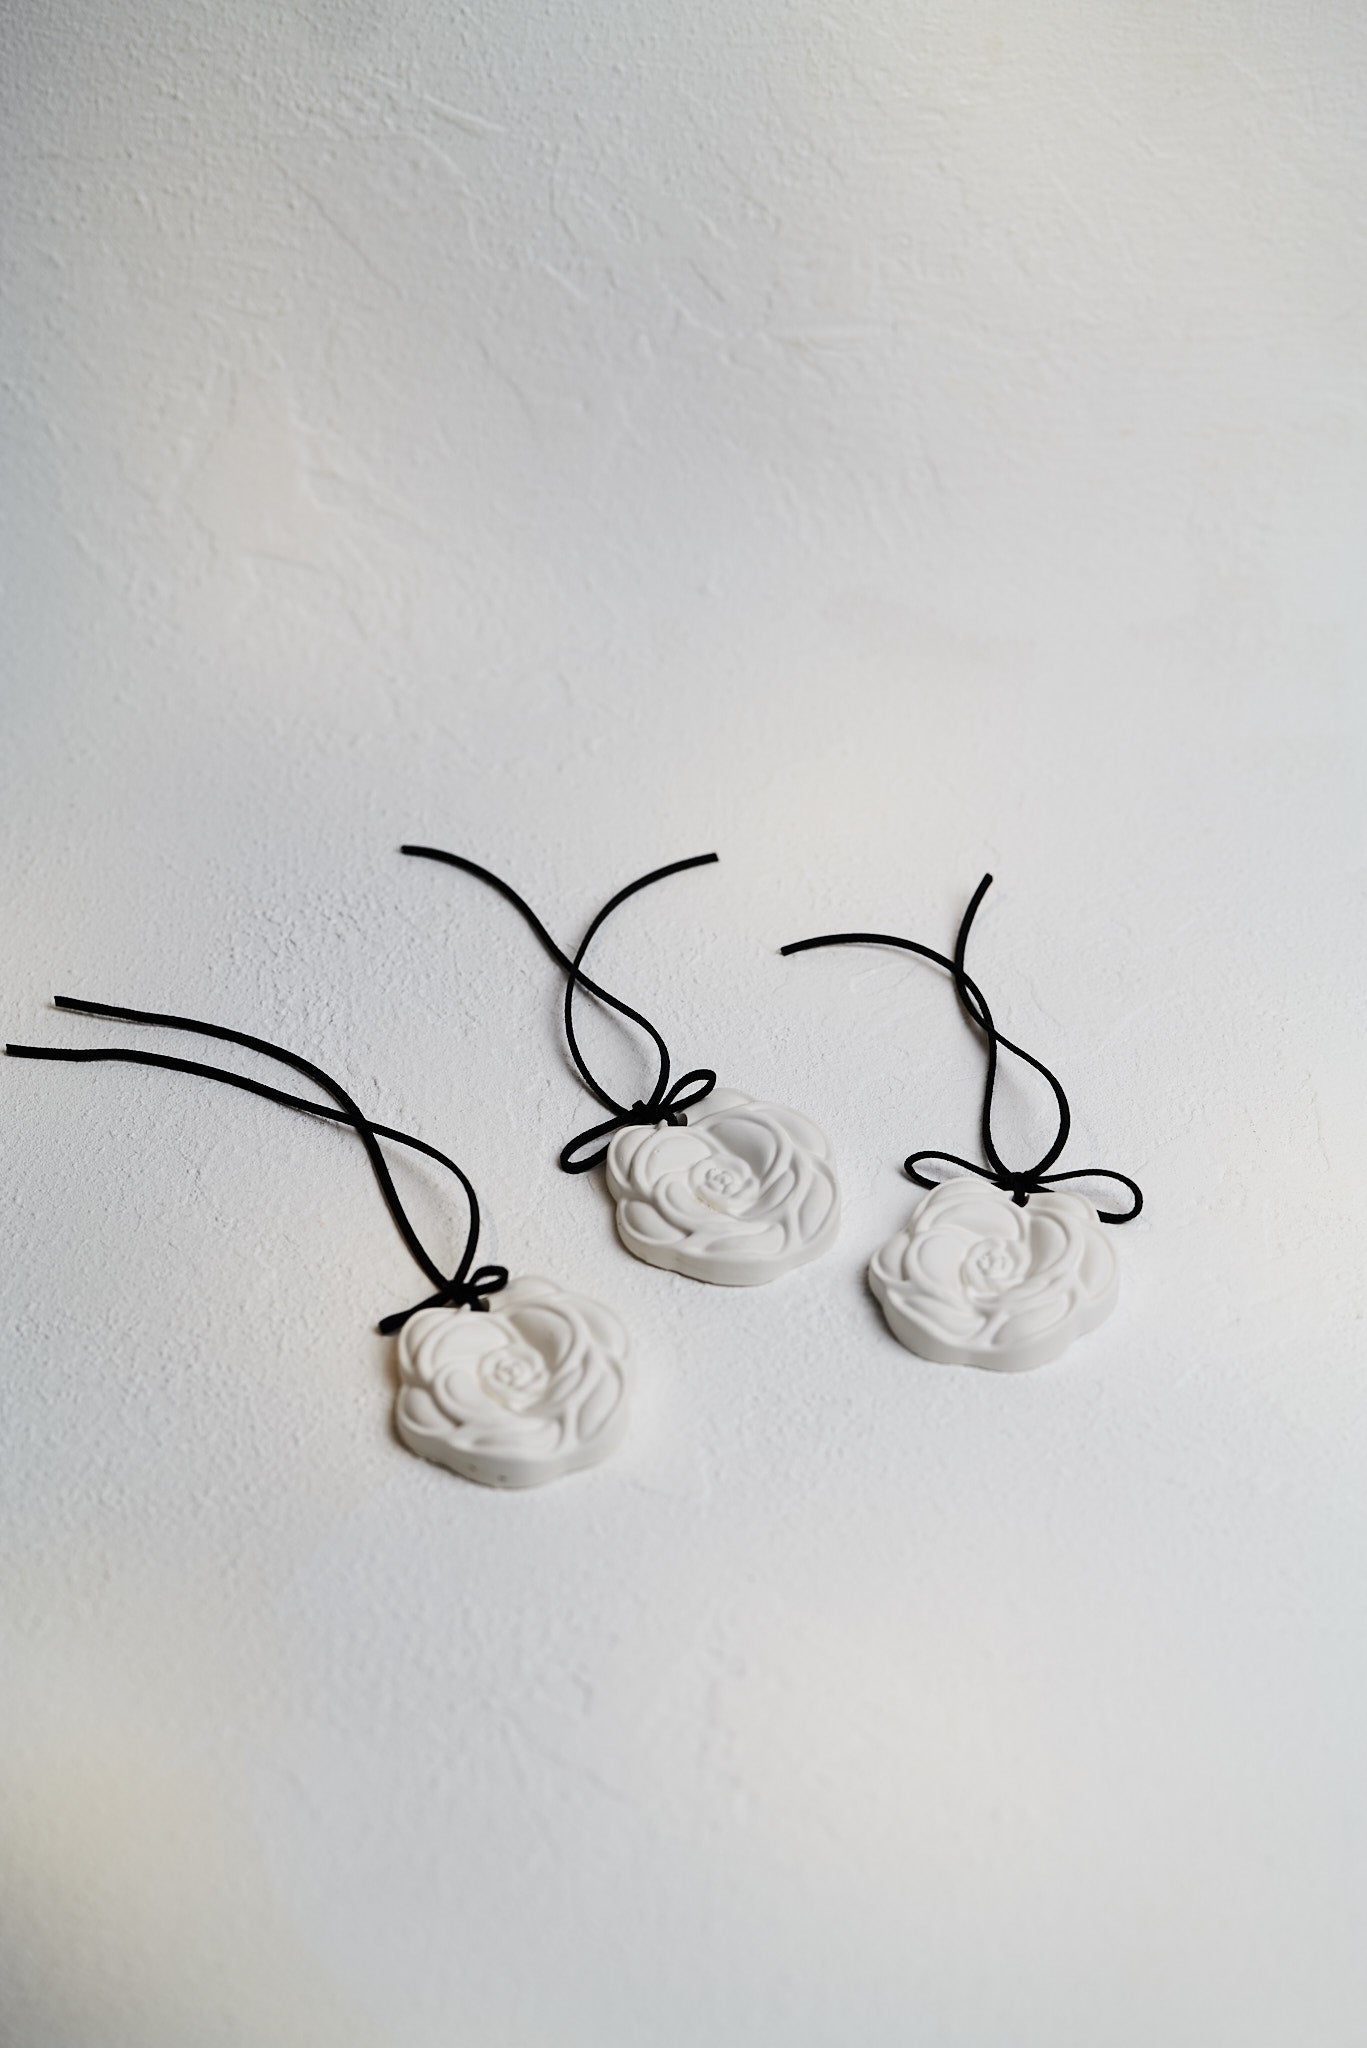 Hanging flower diffuser